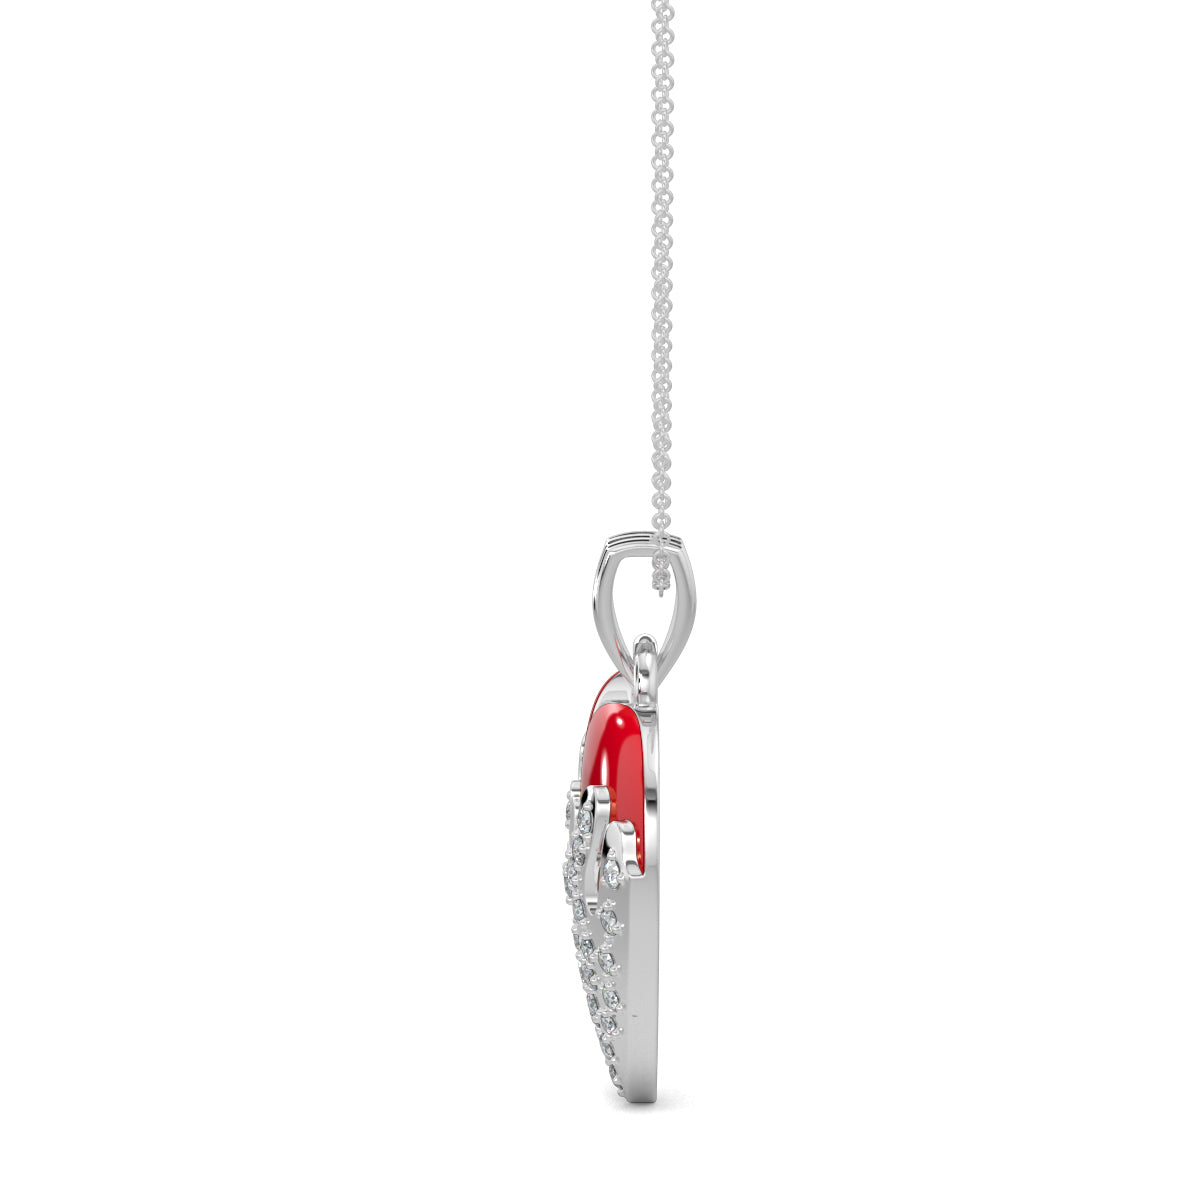 White Gold, Diamond Pendants, natural diamond pendant, lab-grown diamond pendant, Eternal Flame Flicker Pendant from Forever Yours Collection, Heart-shaped Pendant, Casual Diamond Pendant, Red Enamel, Everyday Jewelry, Flame-inspired Design